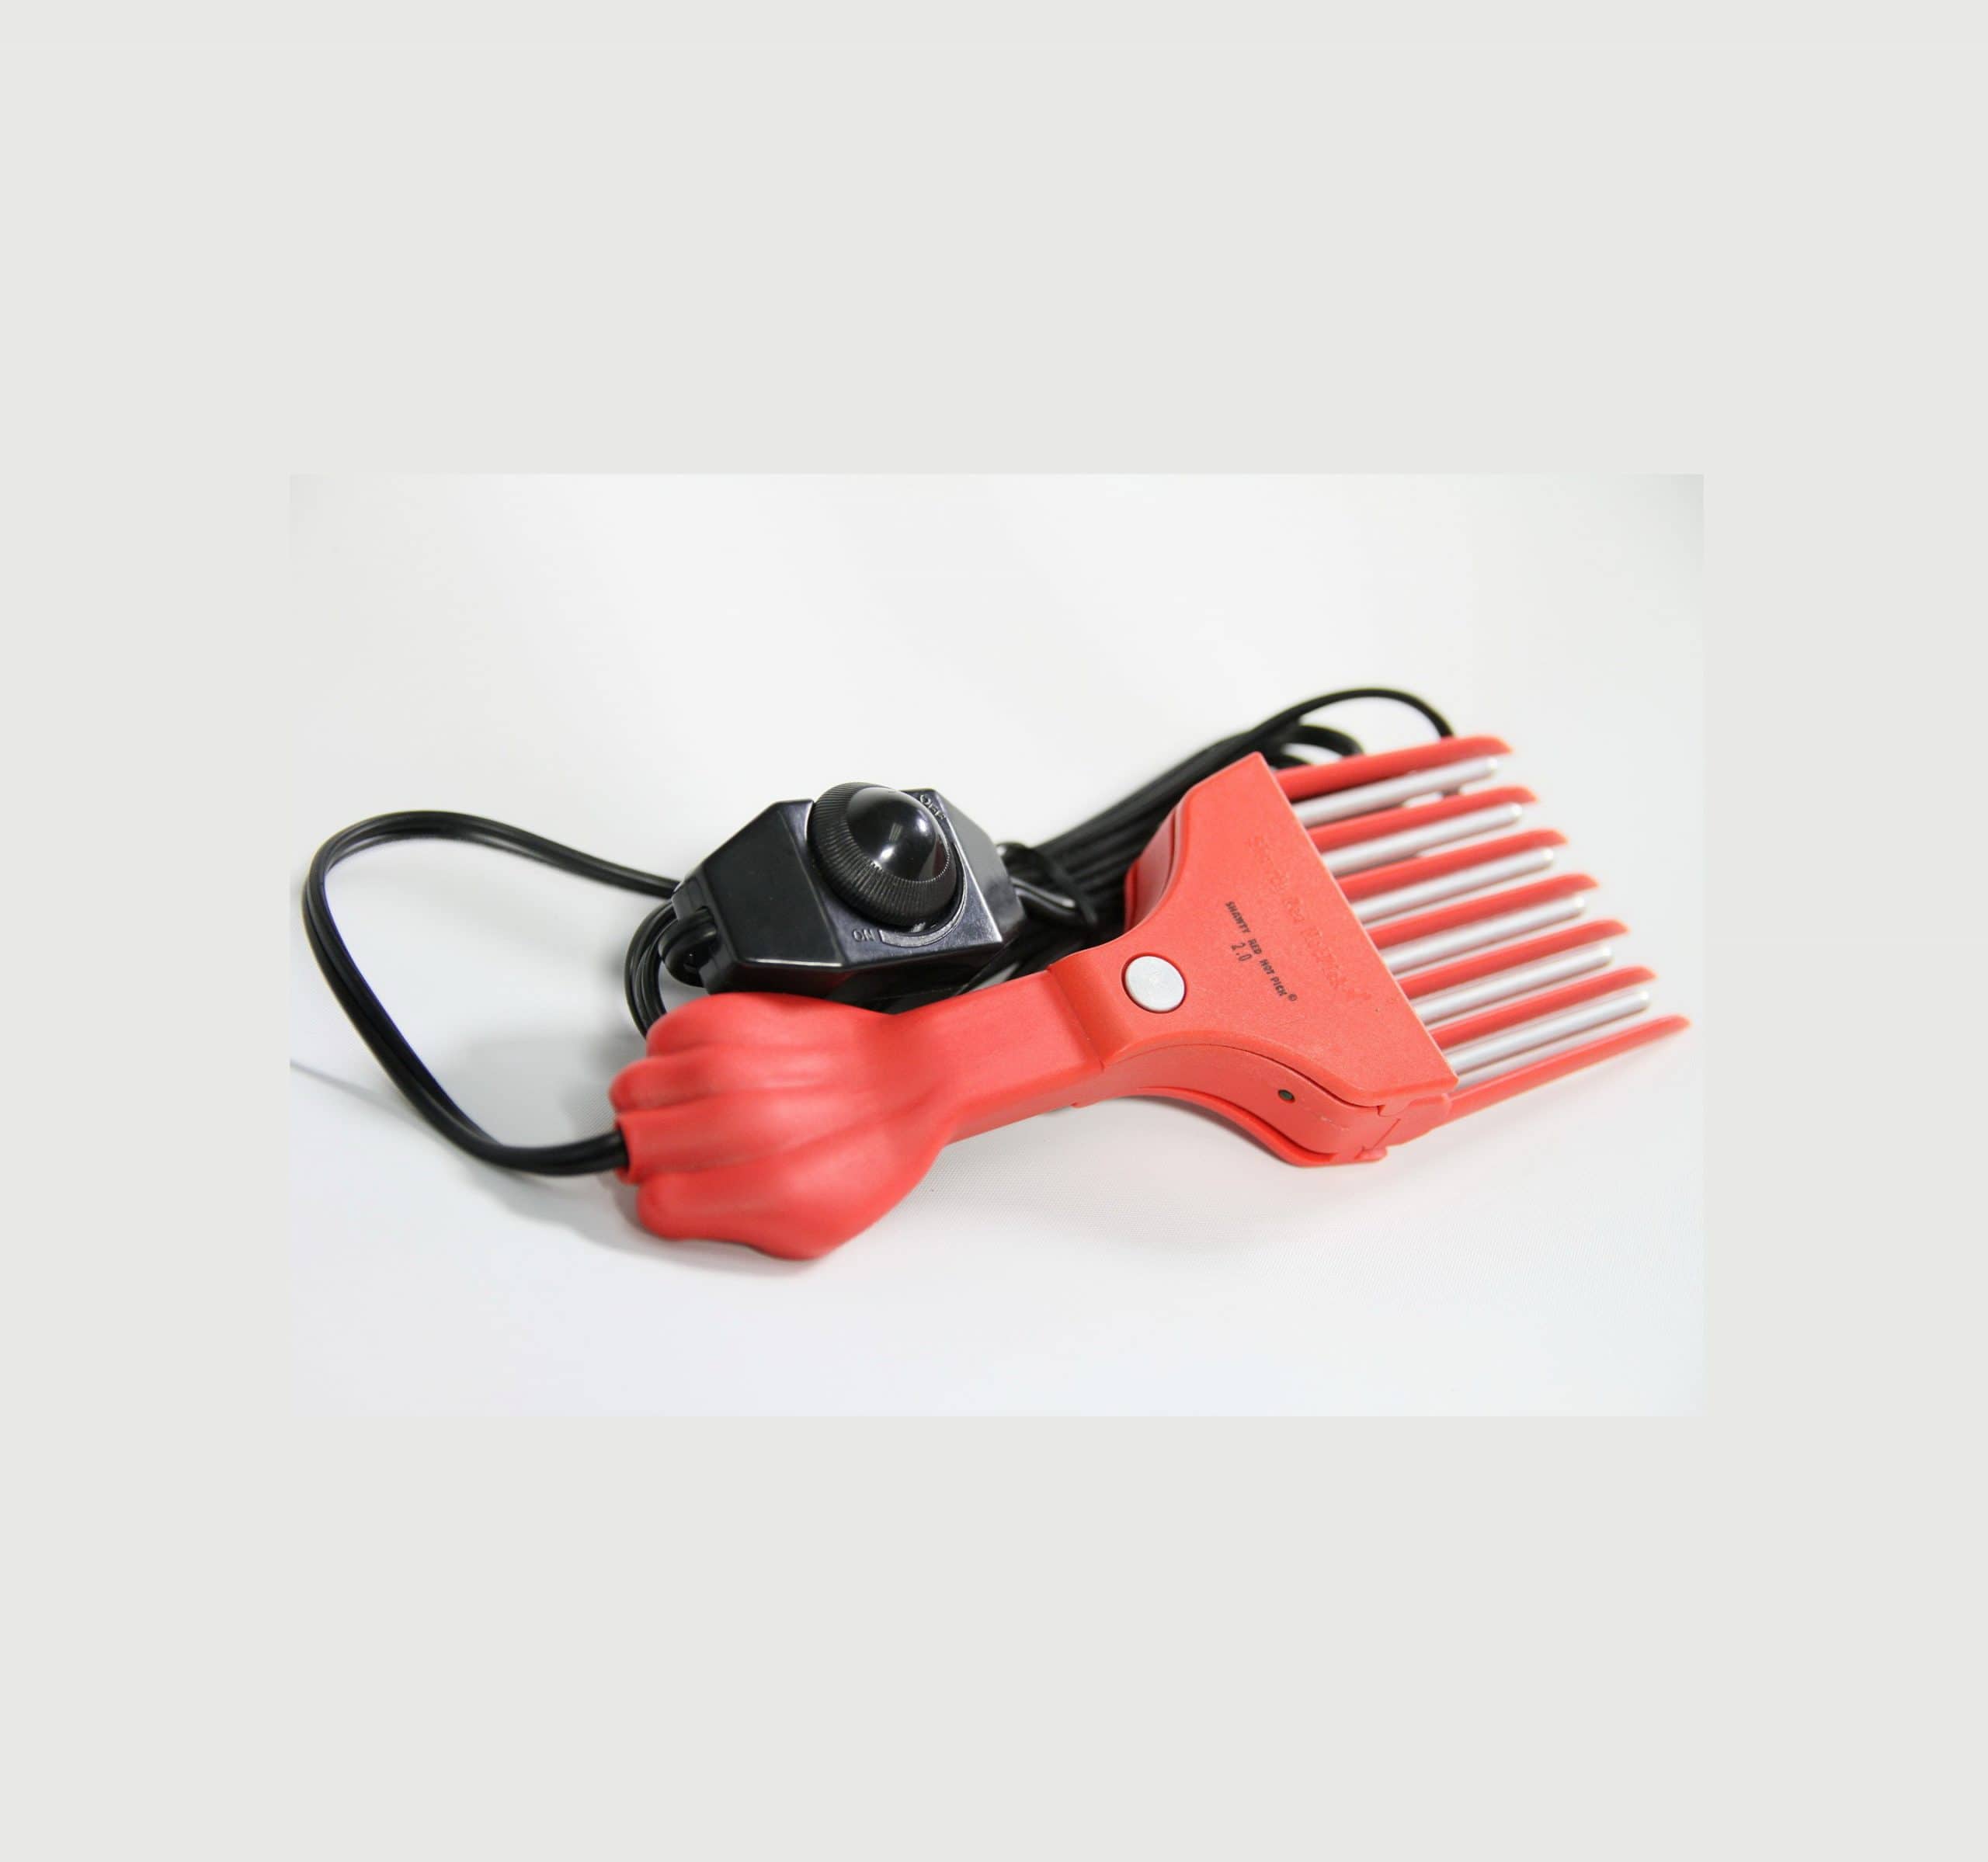 Shawty Red Hot Pick Electric Beard & Natural Hair Styling Tool ( New  Package )